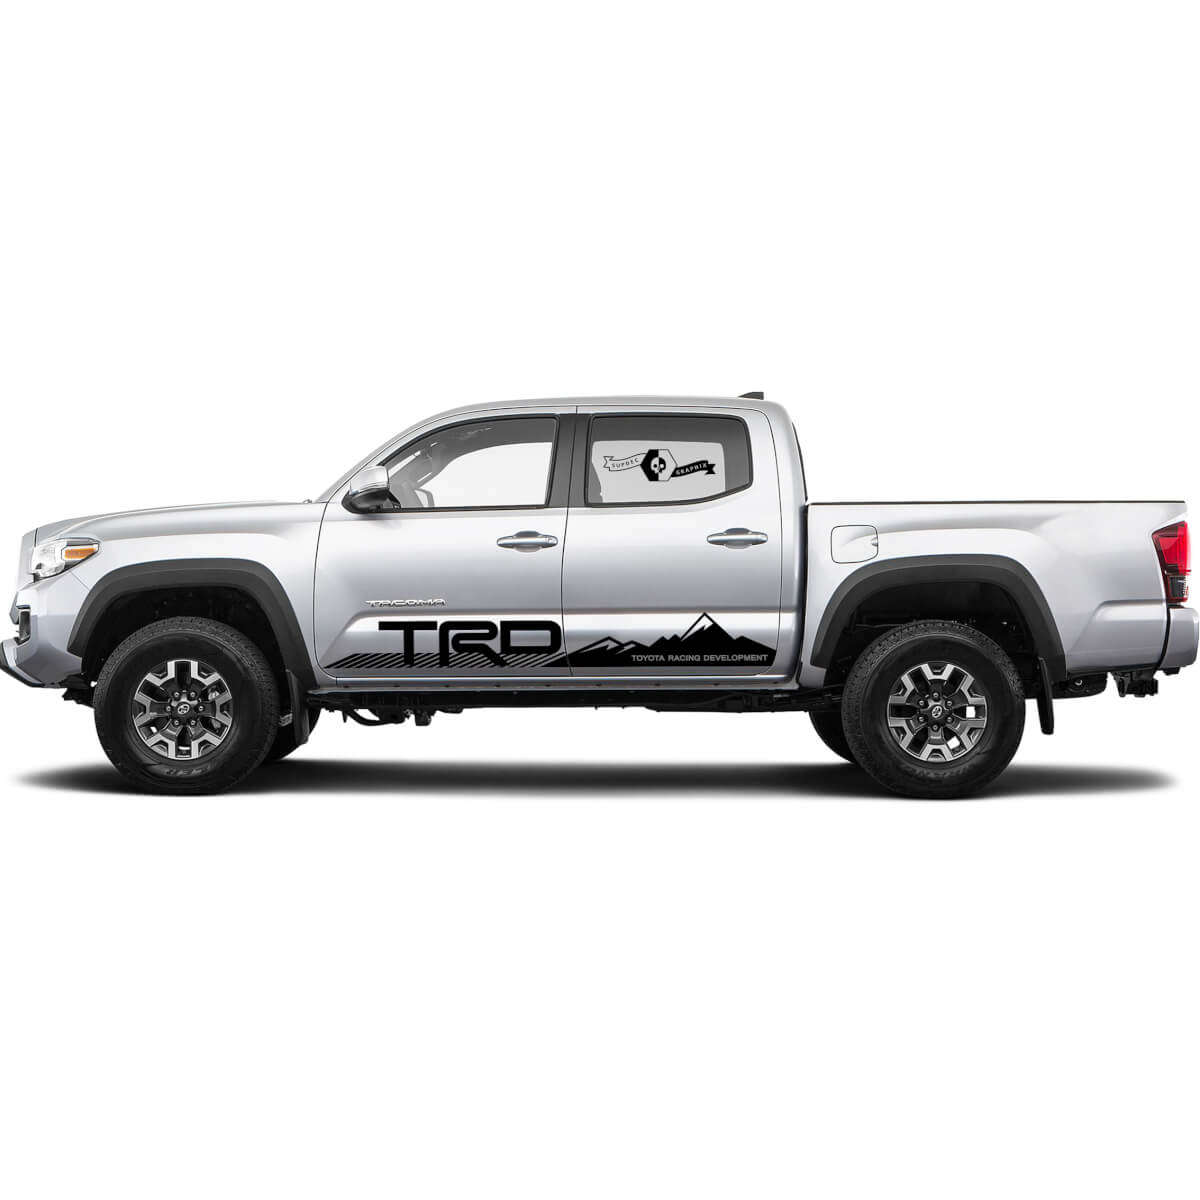 TRD off road Mountains Style for Side Rocker Panel Truck Decals Stickers for Tacoma Tundra Hilux 4Runner 9